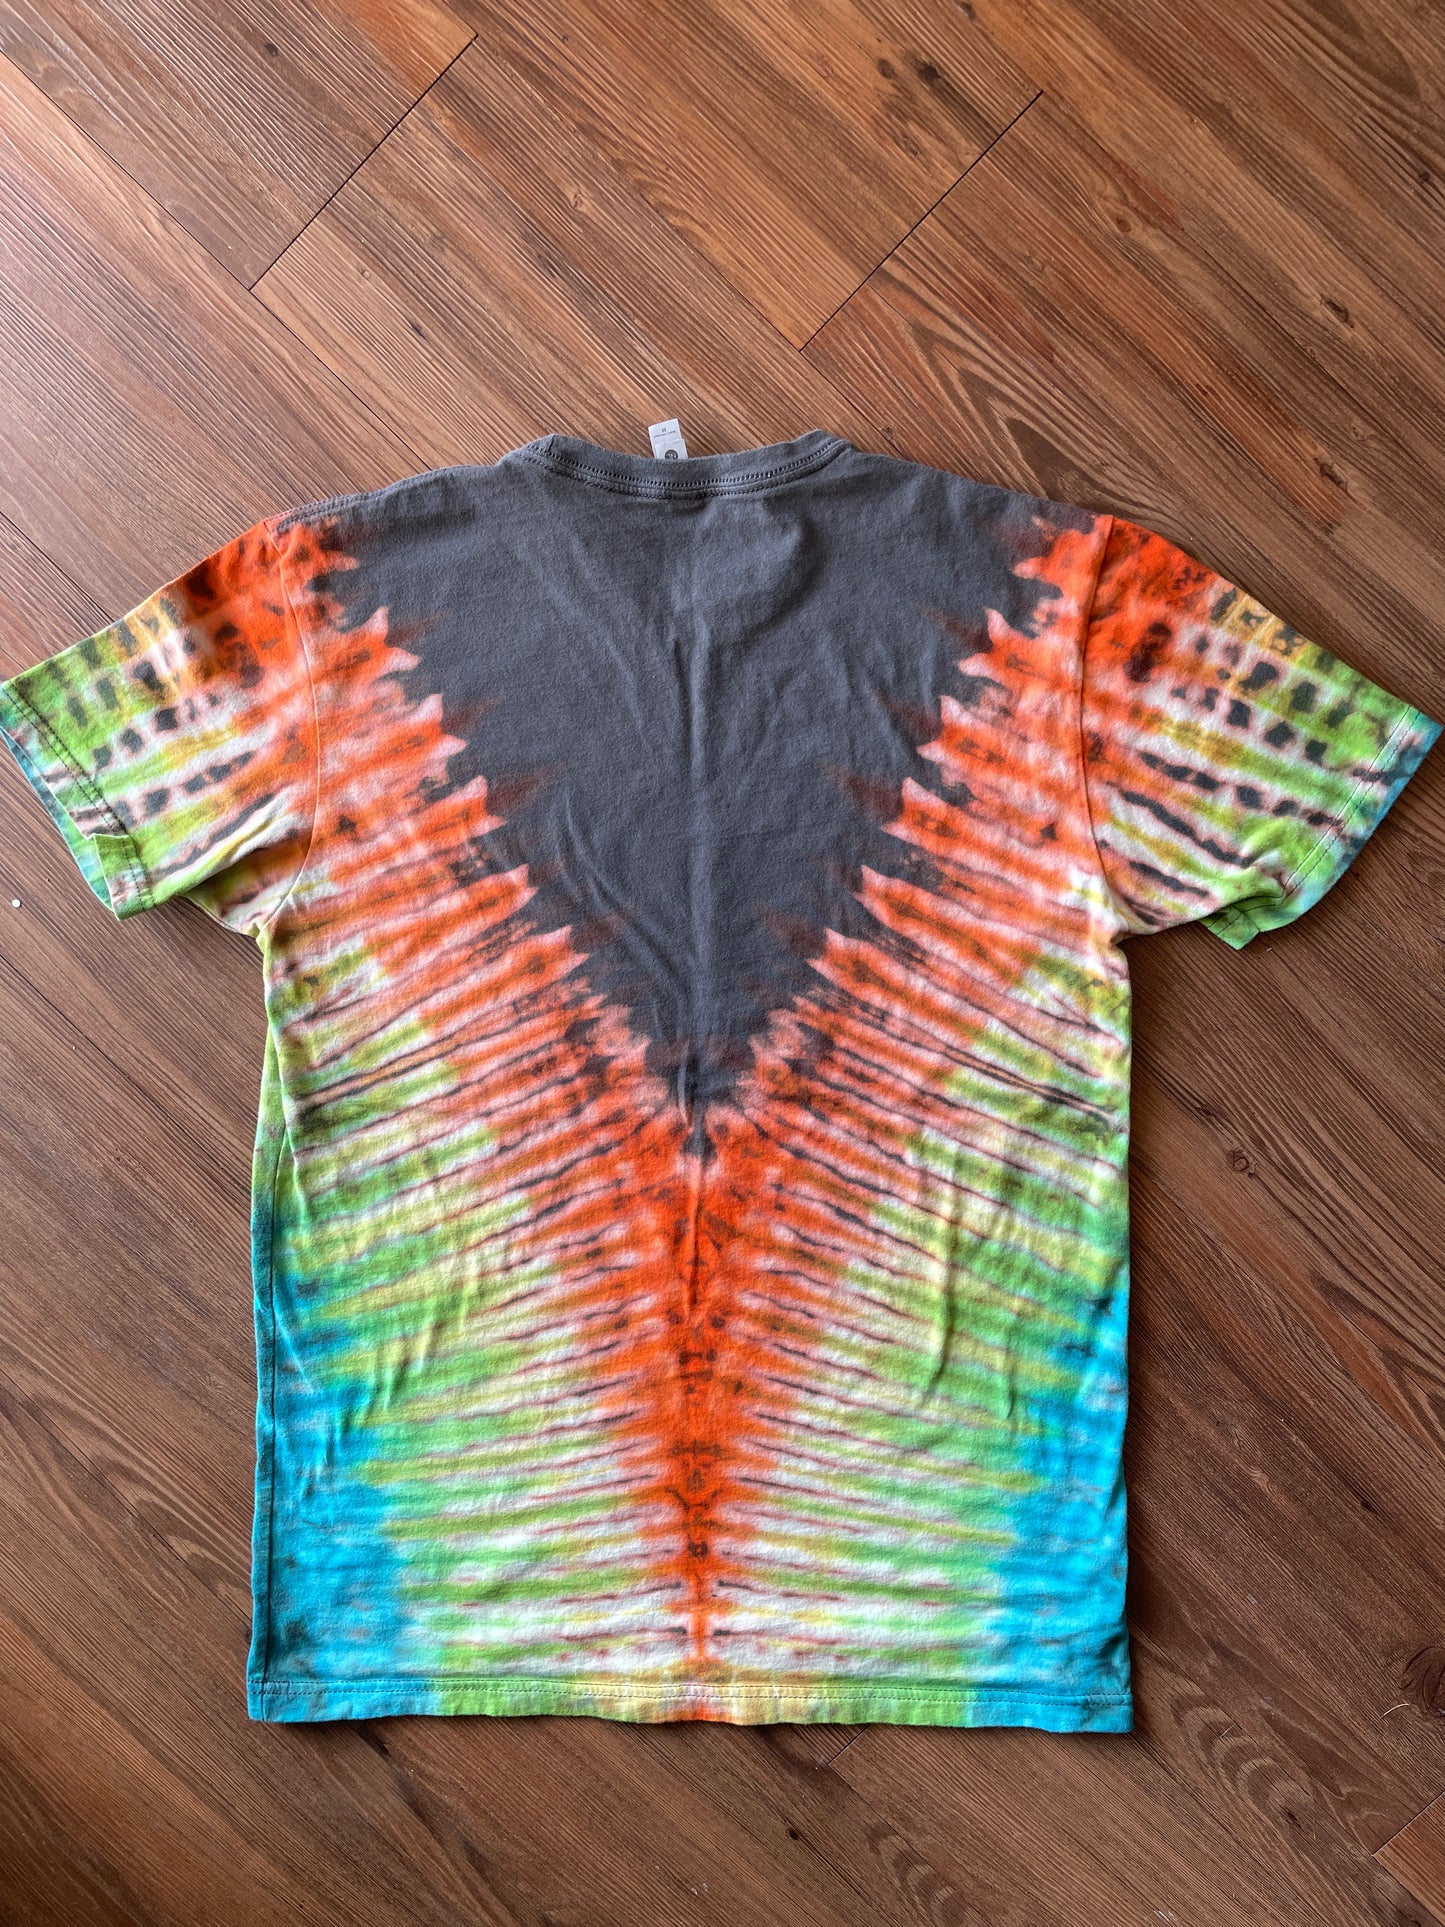 MEDIUM Men’s Psychedelic Lady Head Handmade Tie Dye T-Shirt | One-Of-a-Kind Neon Orange and Gray Short Sleeve